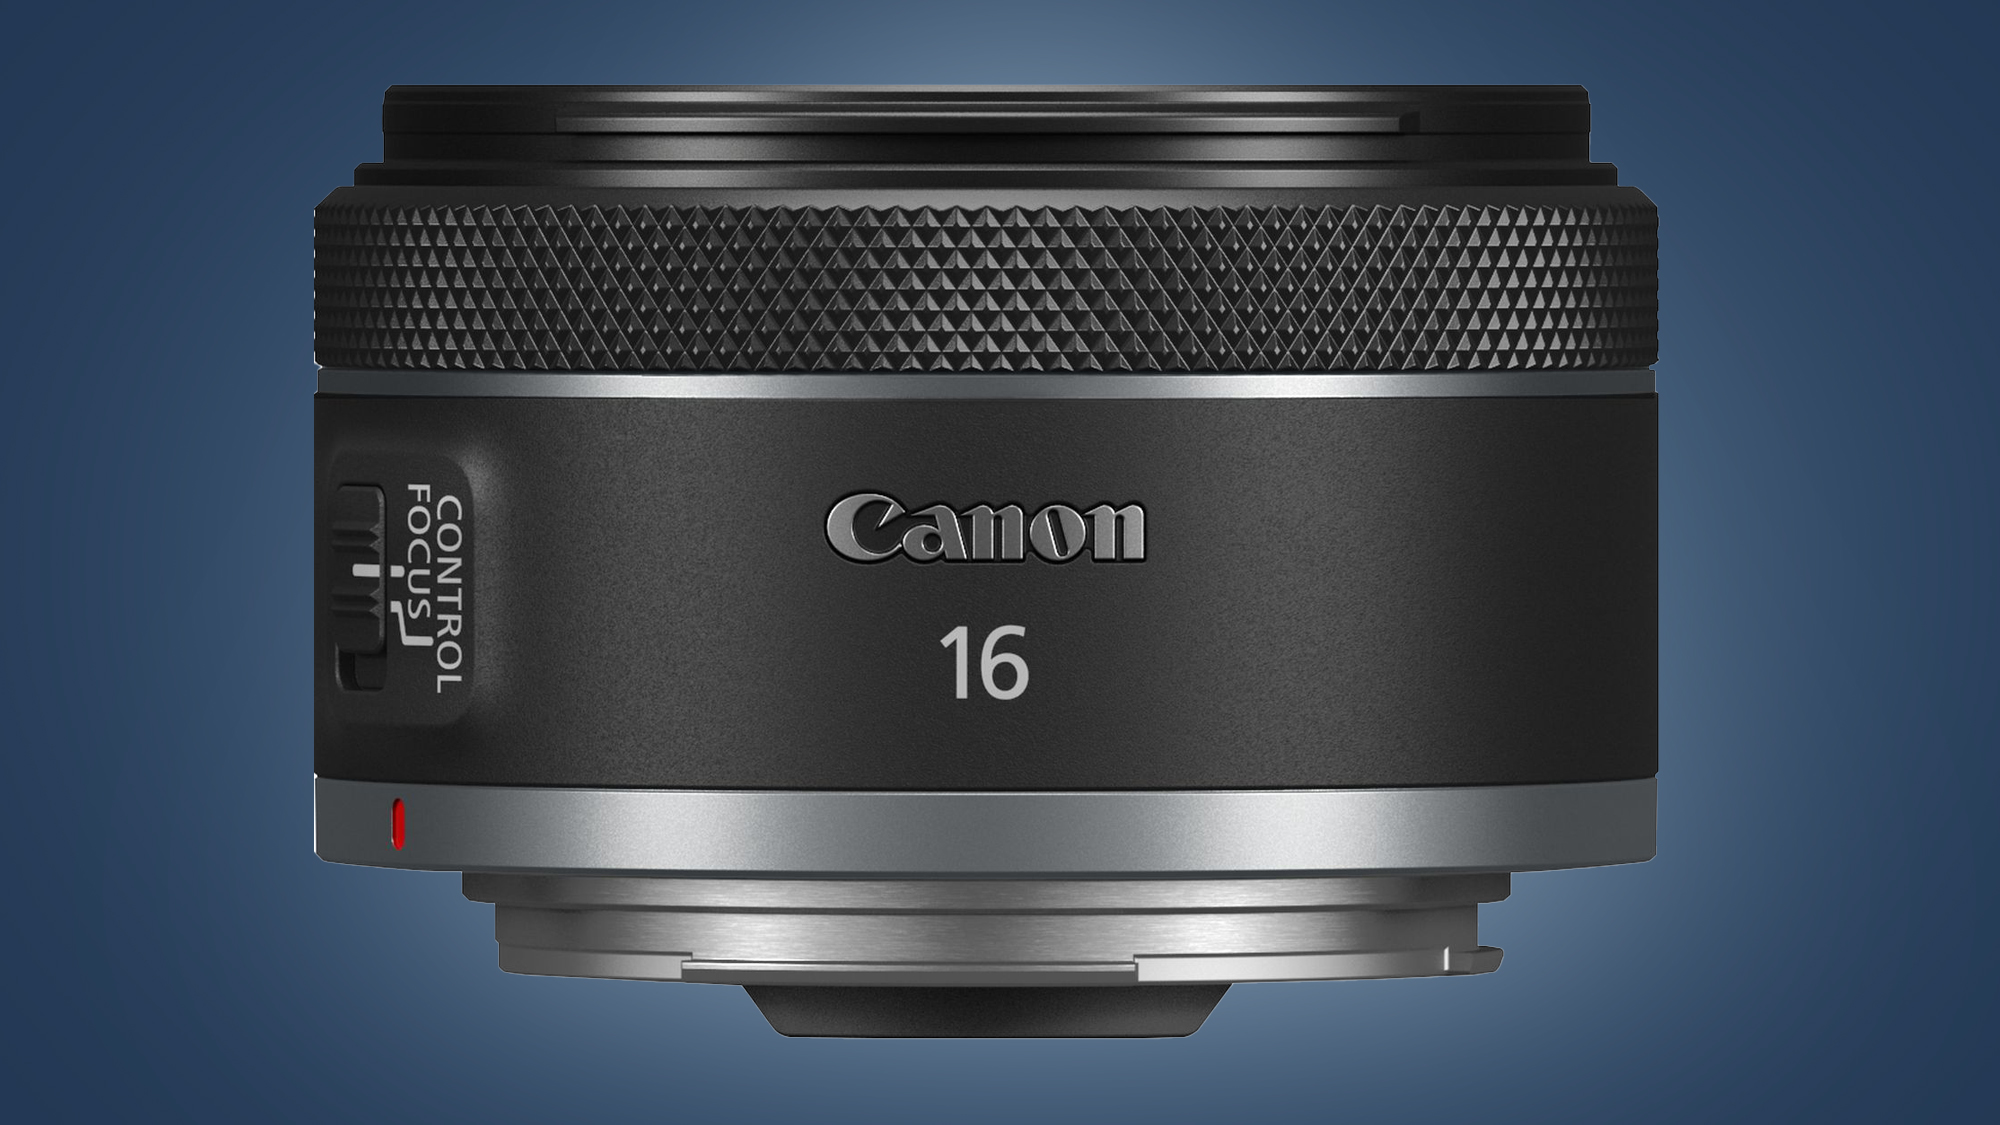 The Canon RF 16MM F2.8 STM lens on a blue background